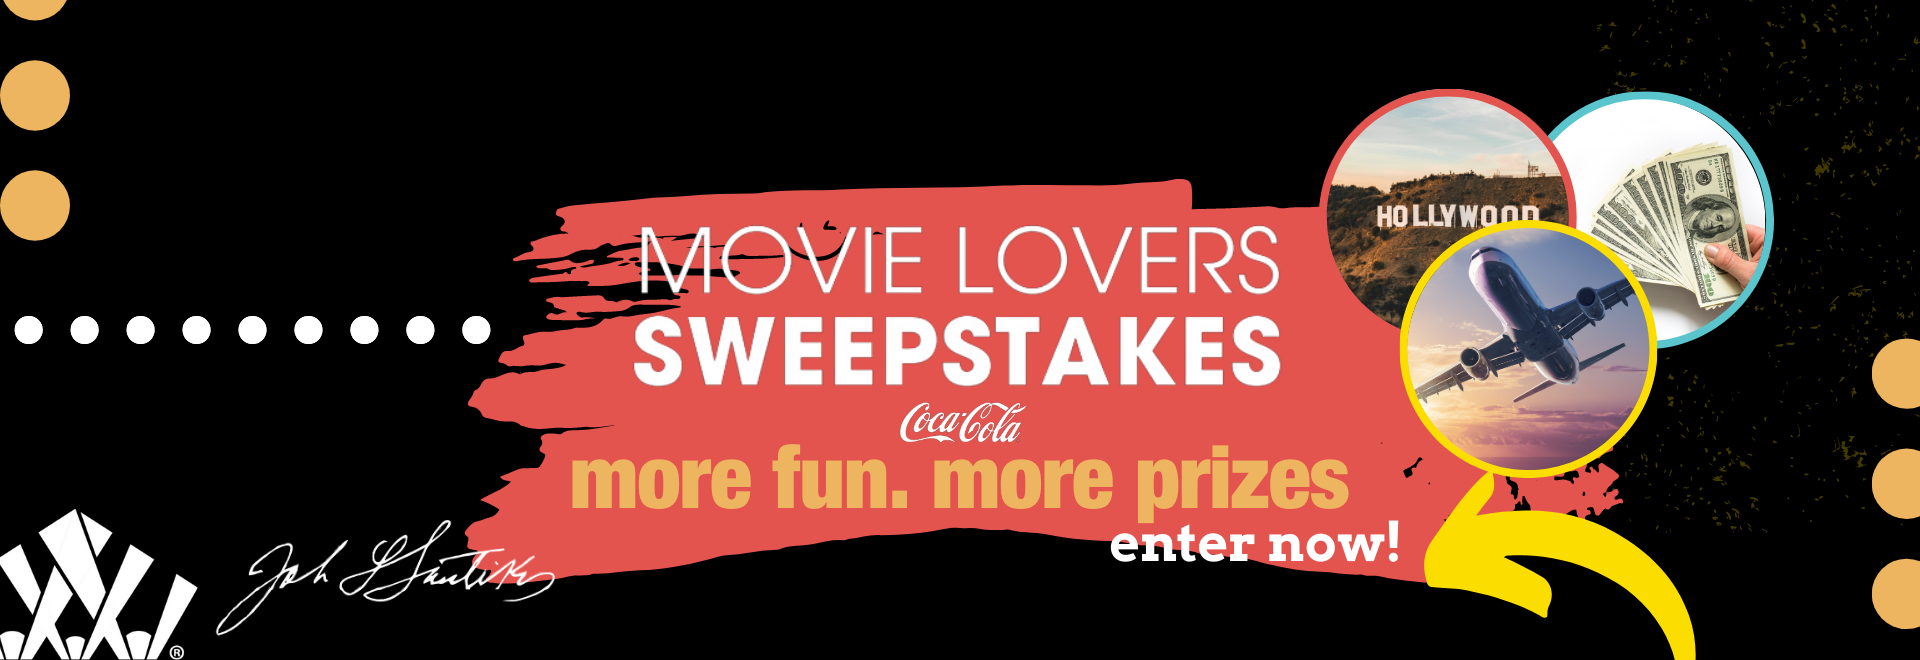 Fun ad for Santikos Entertainment Movie Lovers Sweepstakes featuring images of the grand prize, bold text and logo.